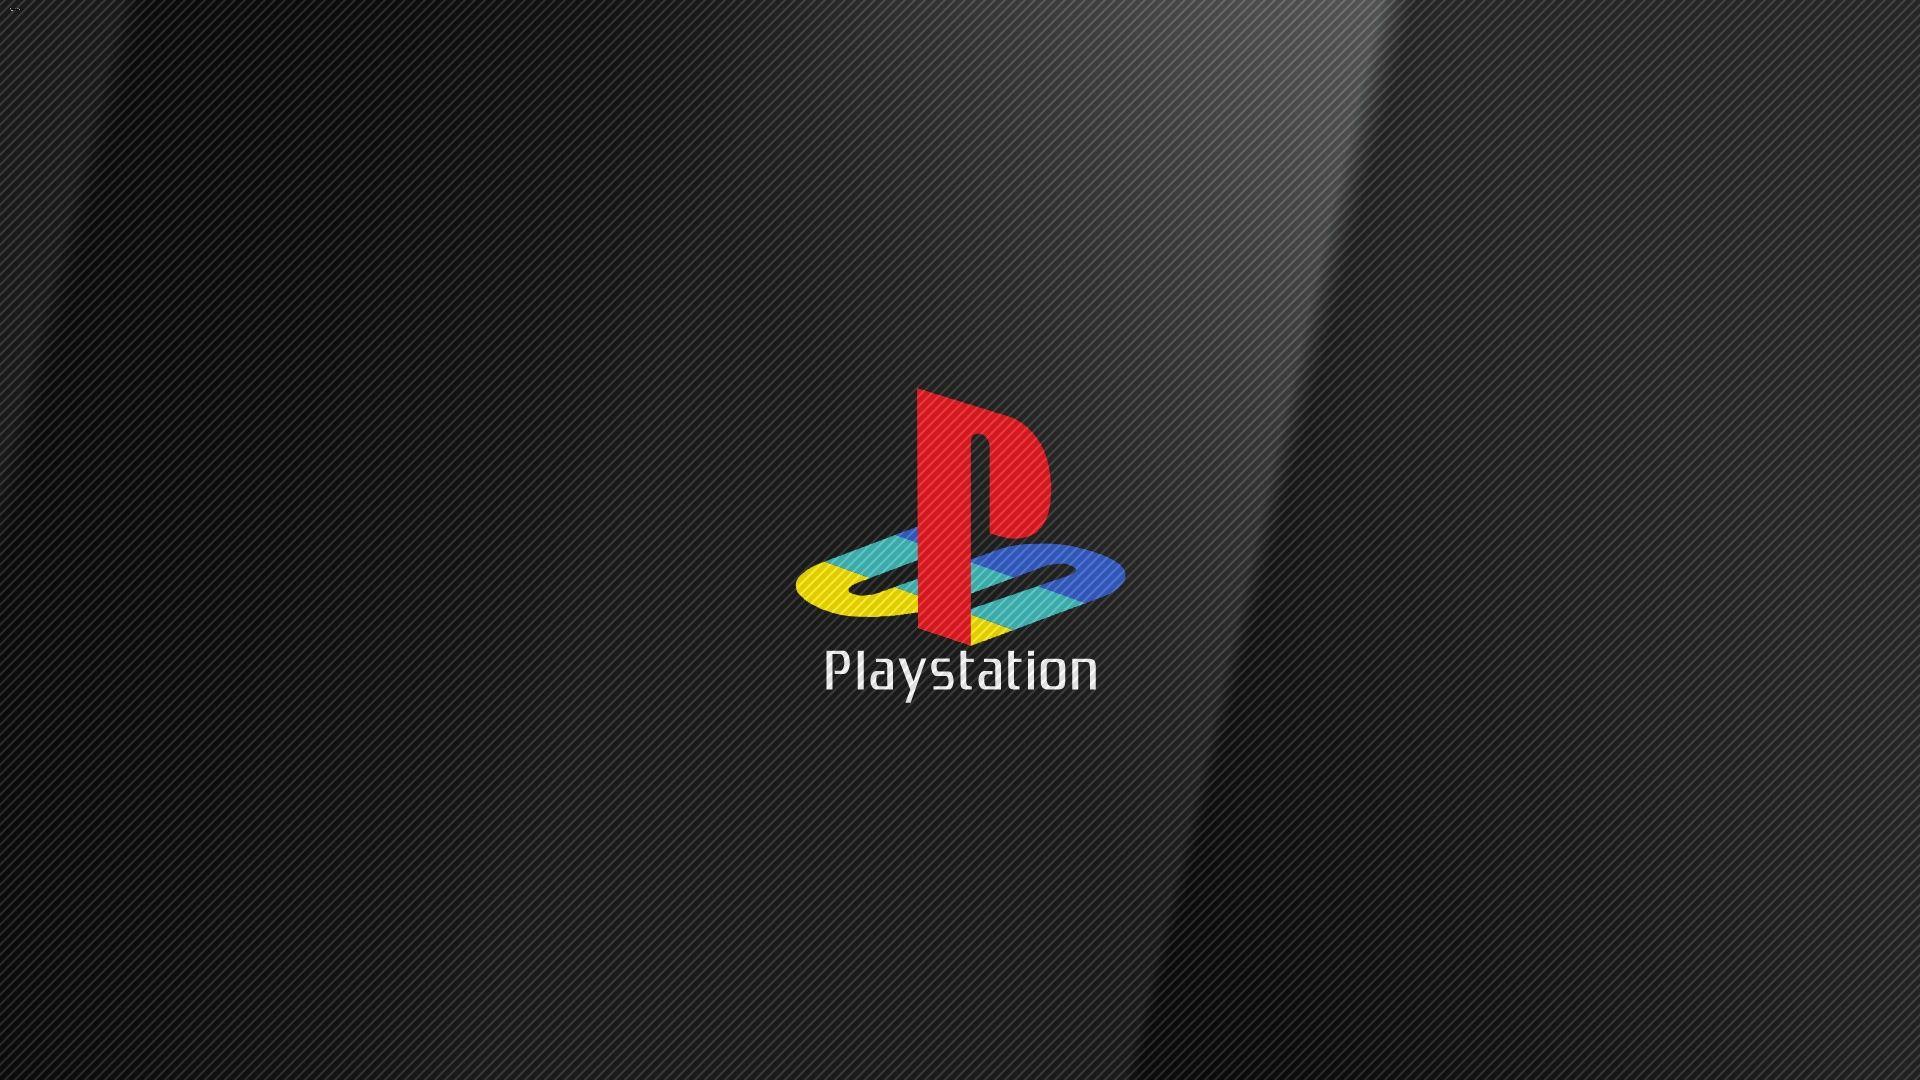 Black Game Ps2 wallpaper in 360x720 resolution